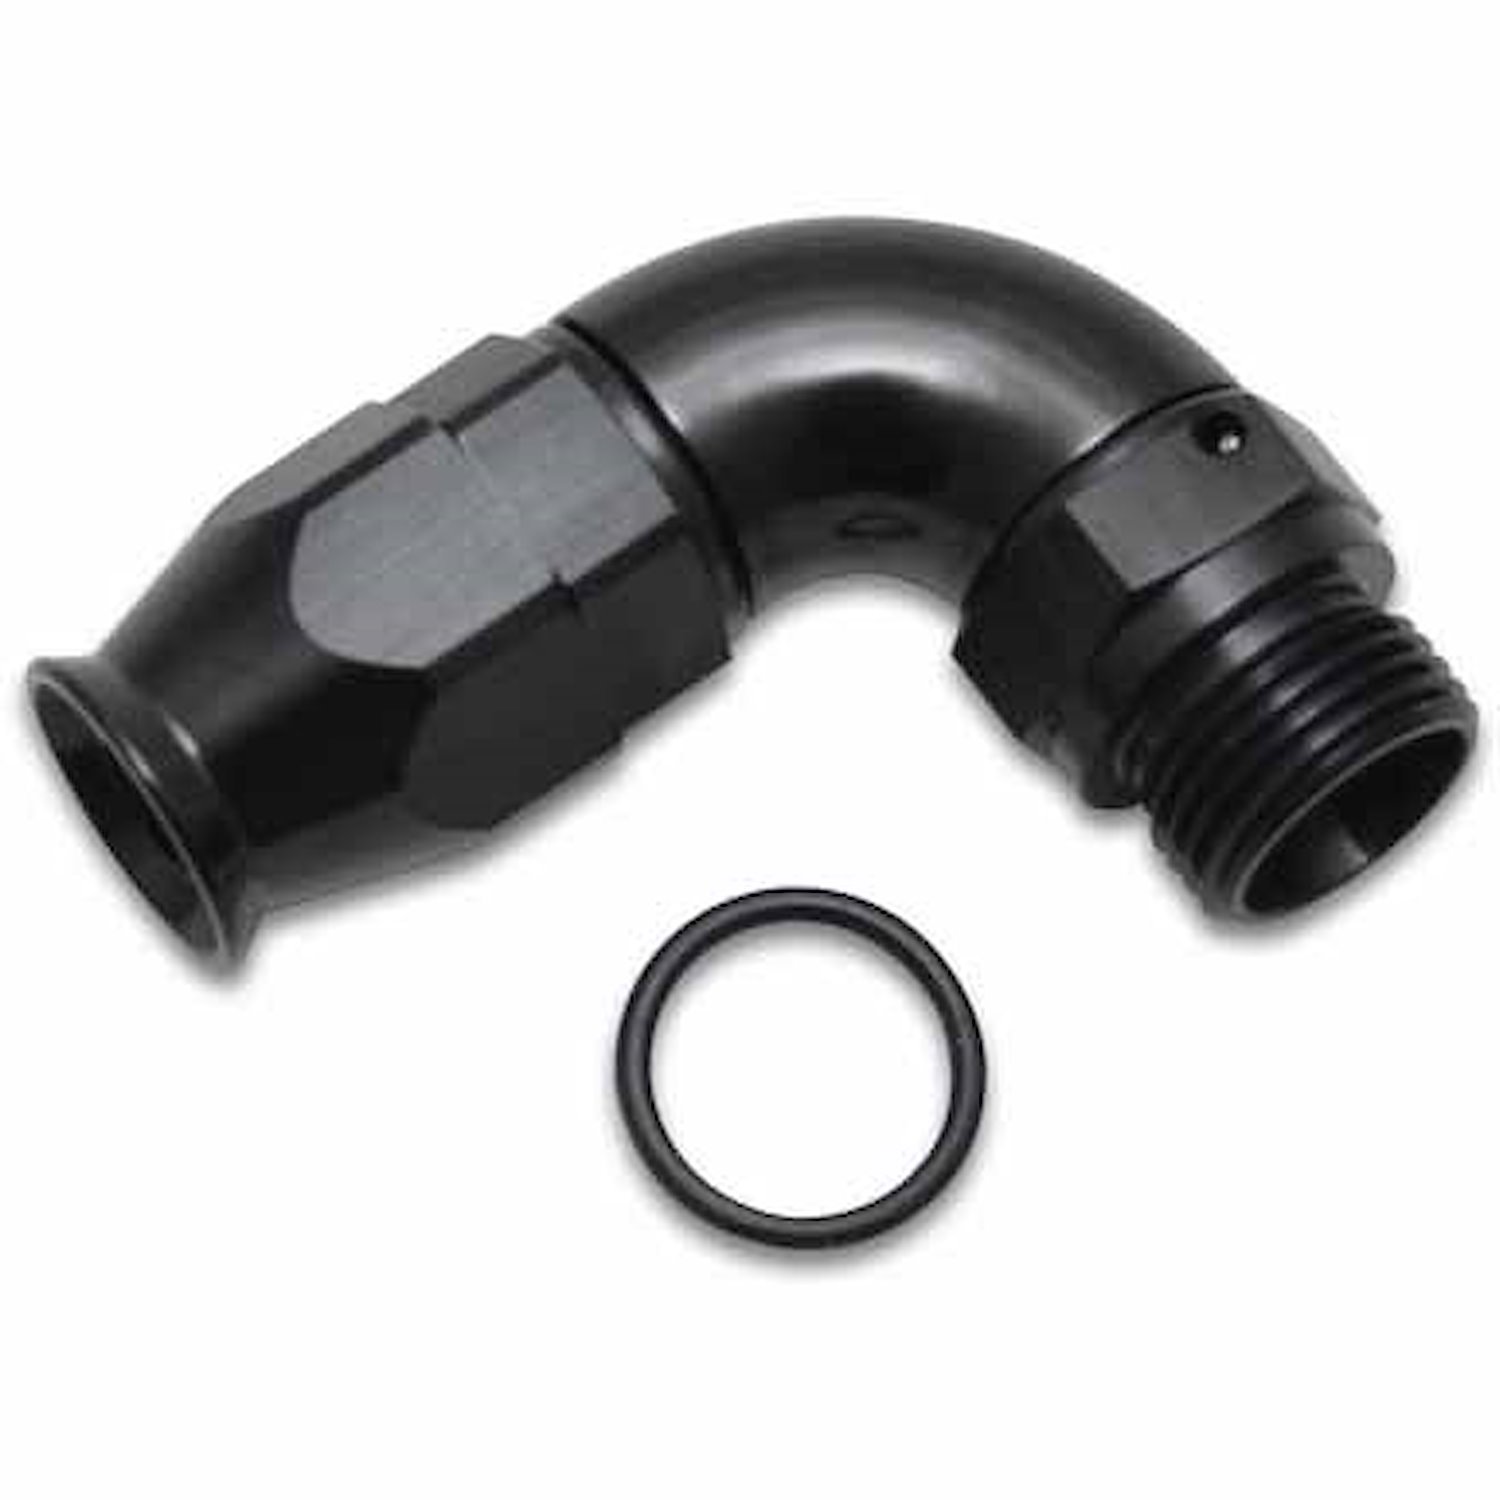 1-Piece PTFE-Lined Hose End Fitting